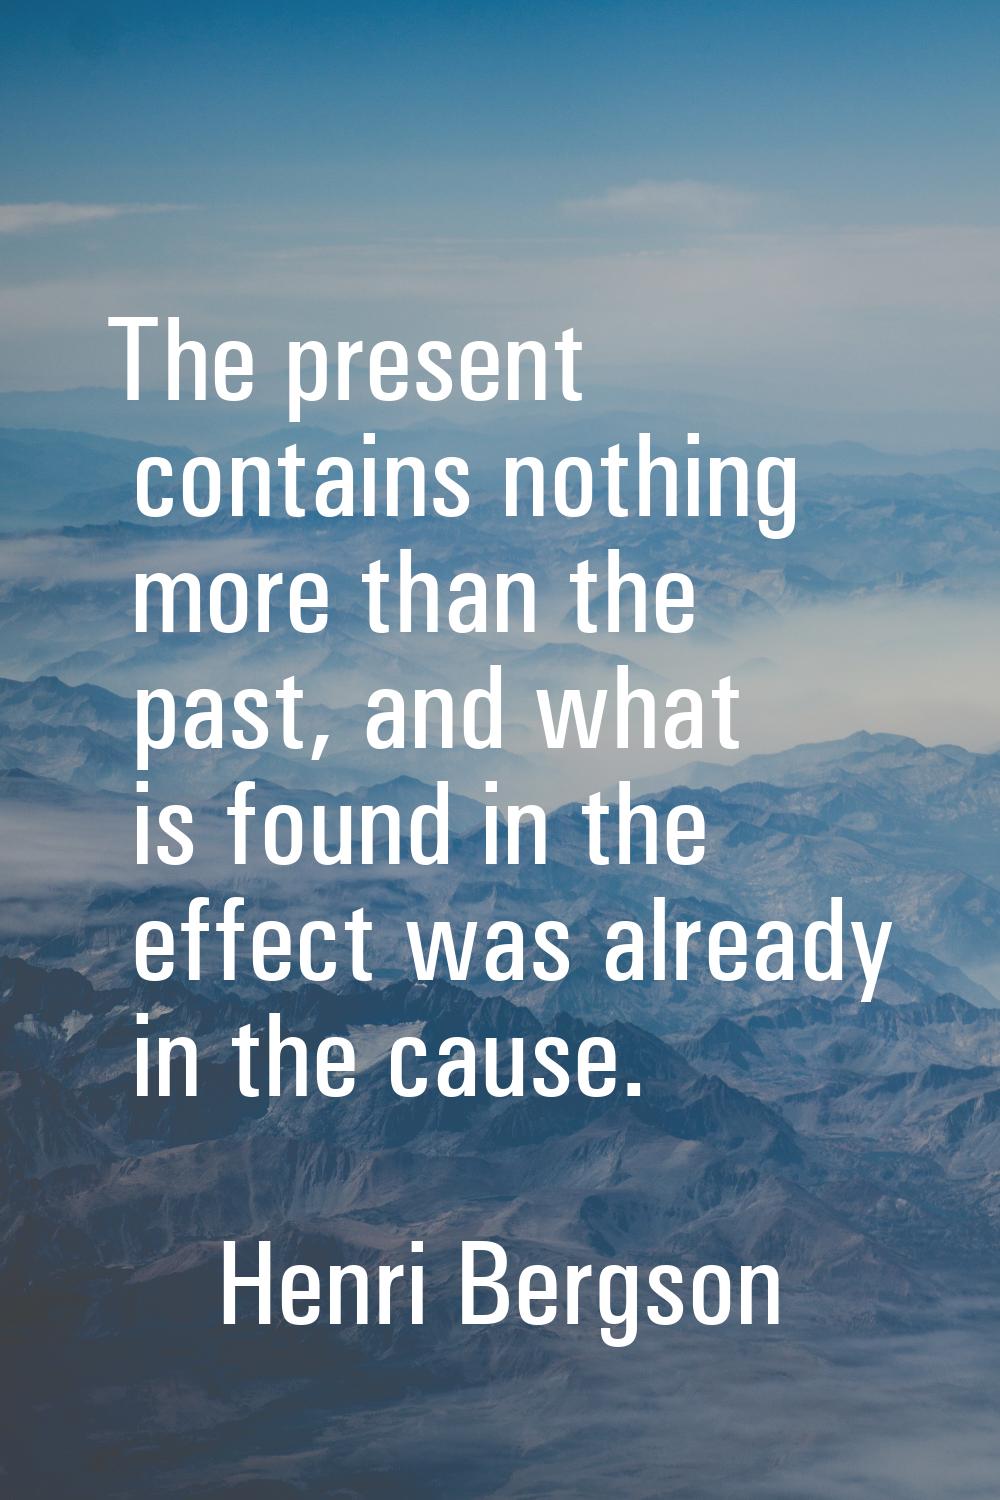 The present contains nothing more than the past, and what is found in the effect was already in the